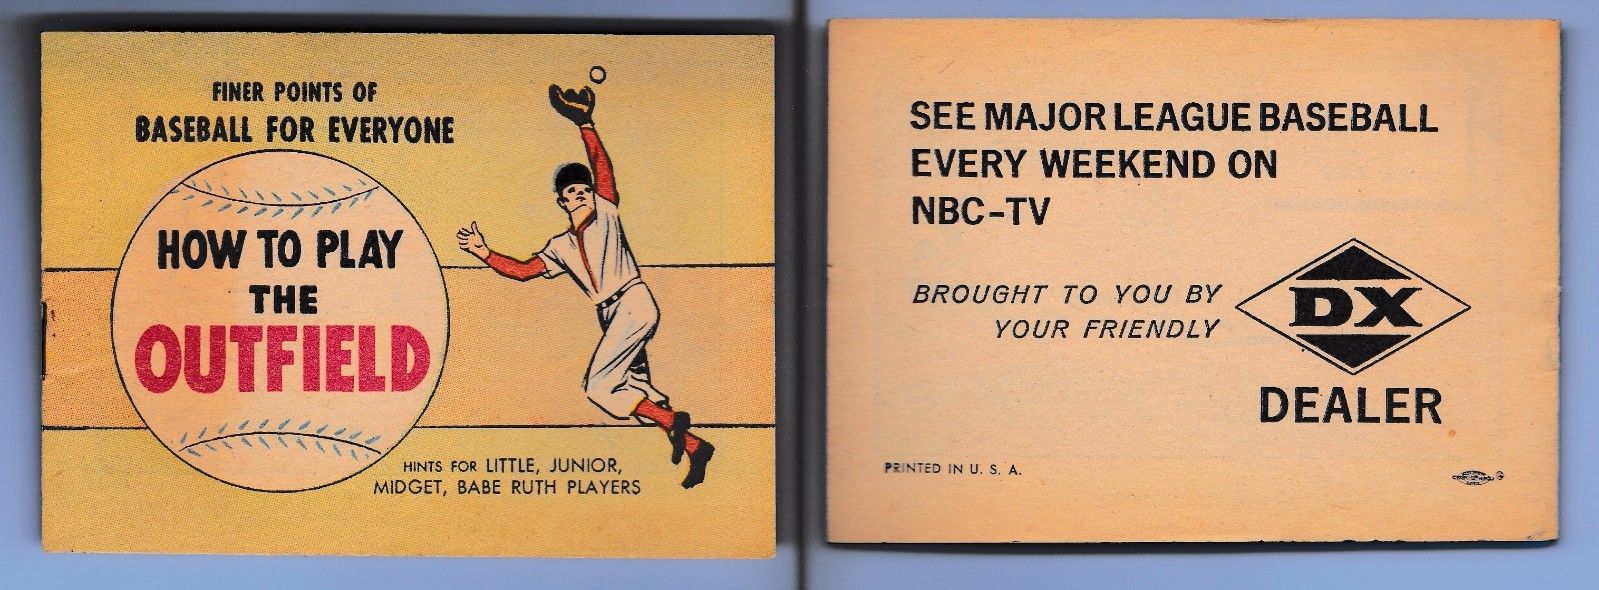  1962 How to Play Outfield - NBC TV/DX Dealer booklet (16 pages) Baseball cards value